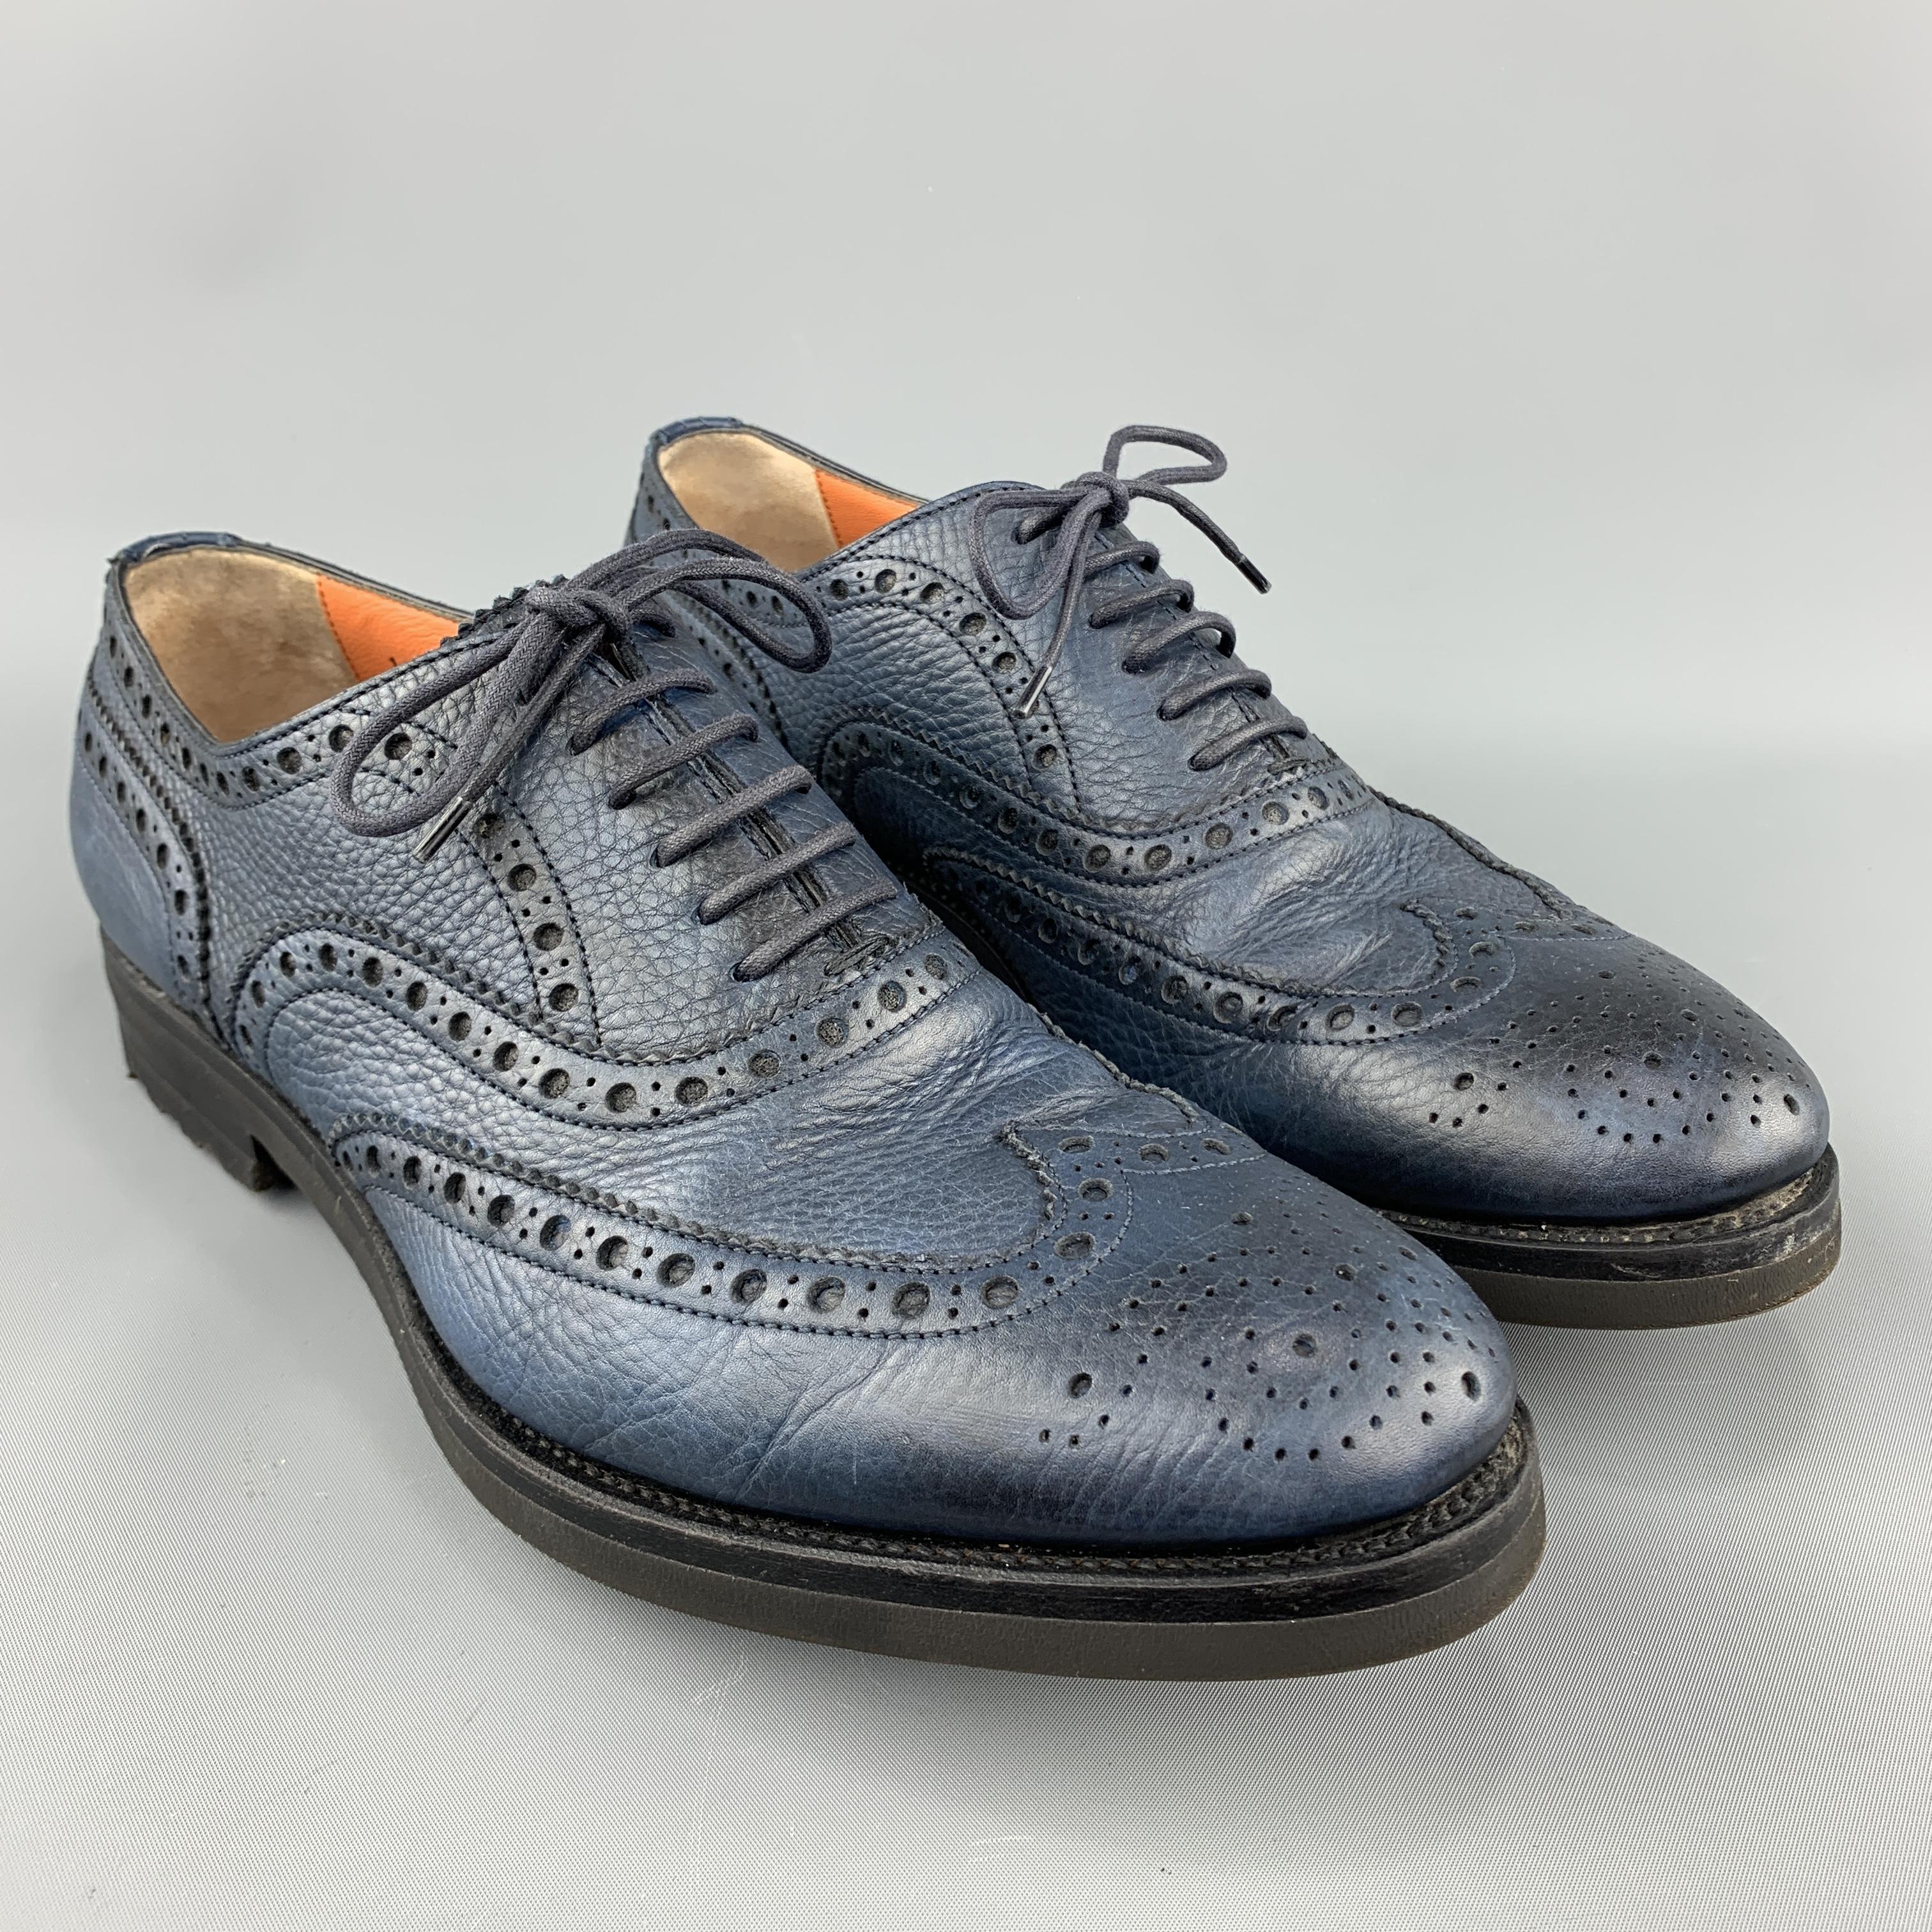 SANTONI dress shoes come in navy blue pebbled leather with a medallion wingtip brogueing throughout, and rubber track sole. Made in Italy.
 
Excellent Pre-Owned Condition.
Marked: IT 45
 
Outsole: 12.25 x 4.25 in.